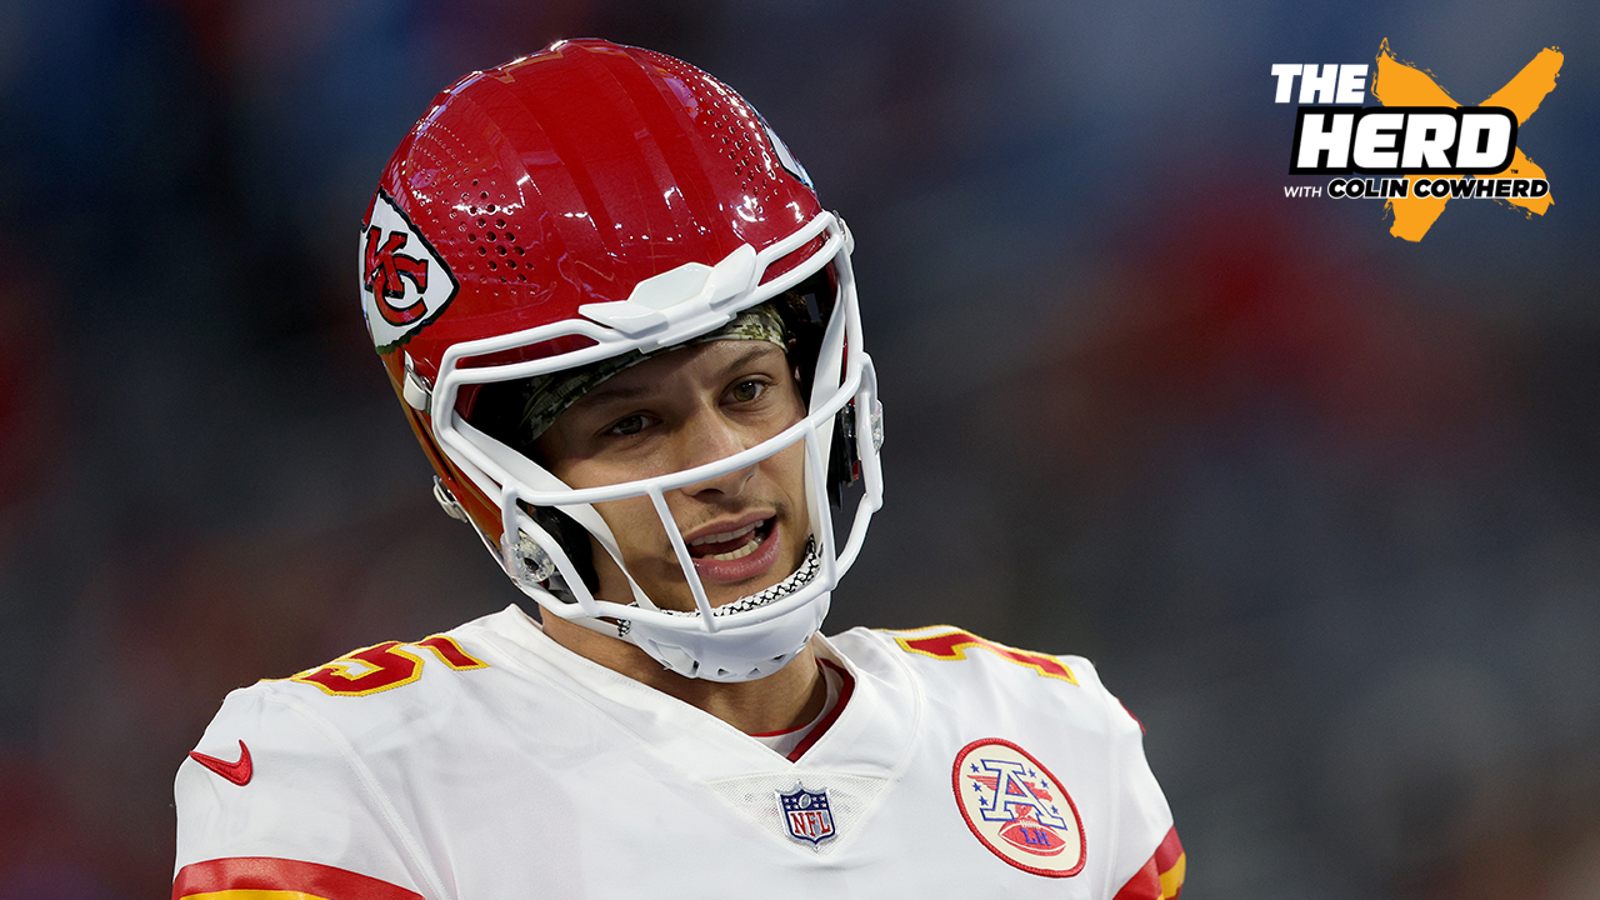 Are Chiefs toughest team to beat in NFL?